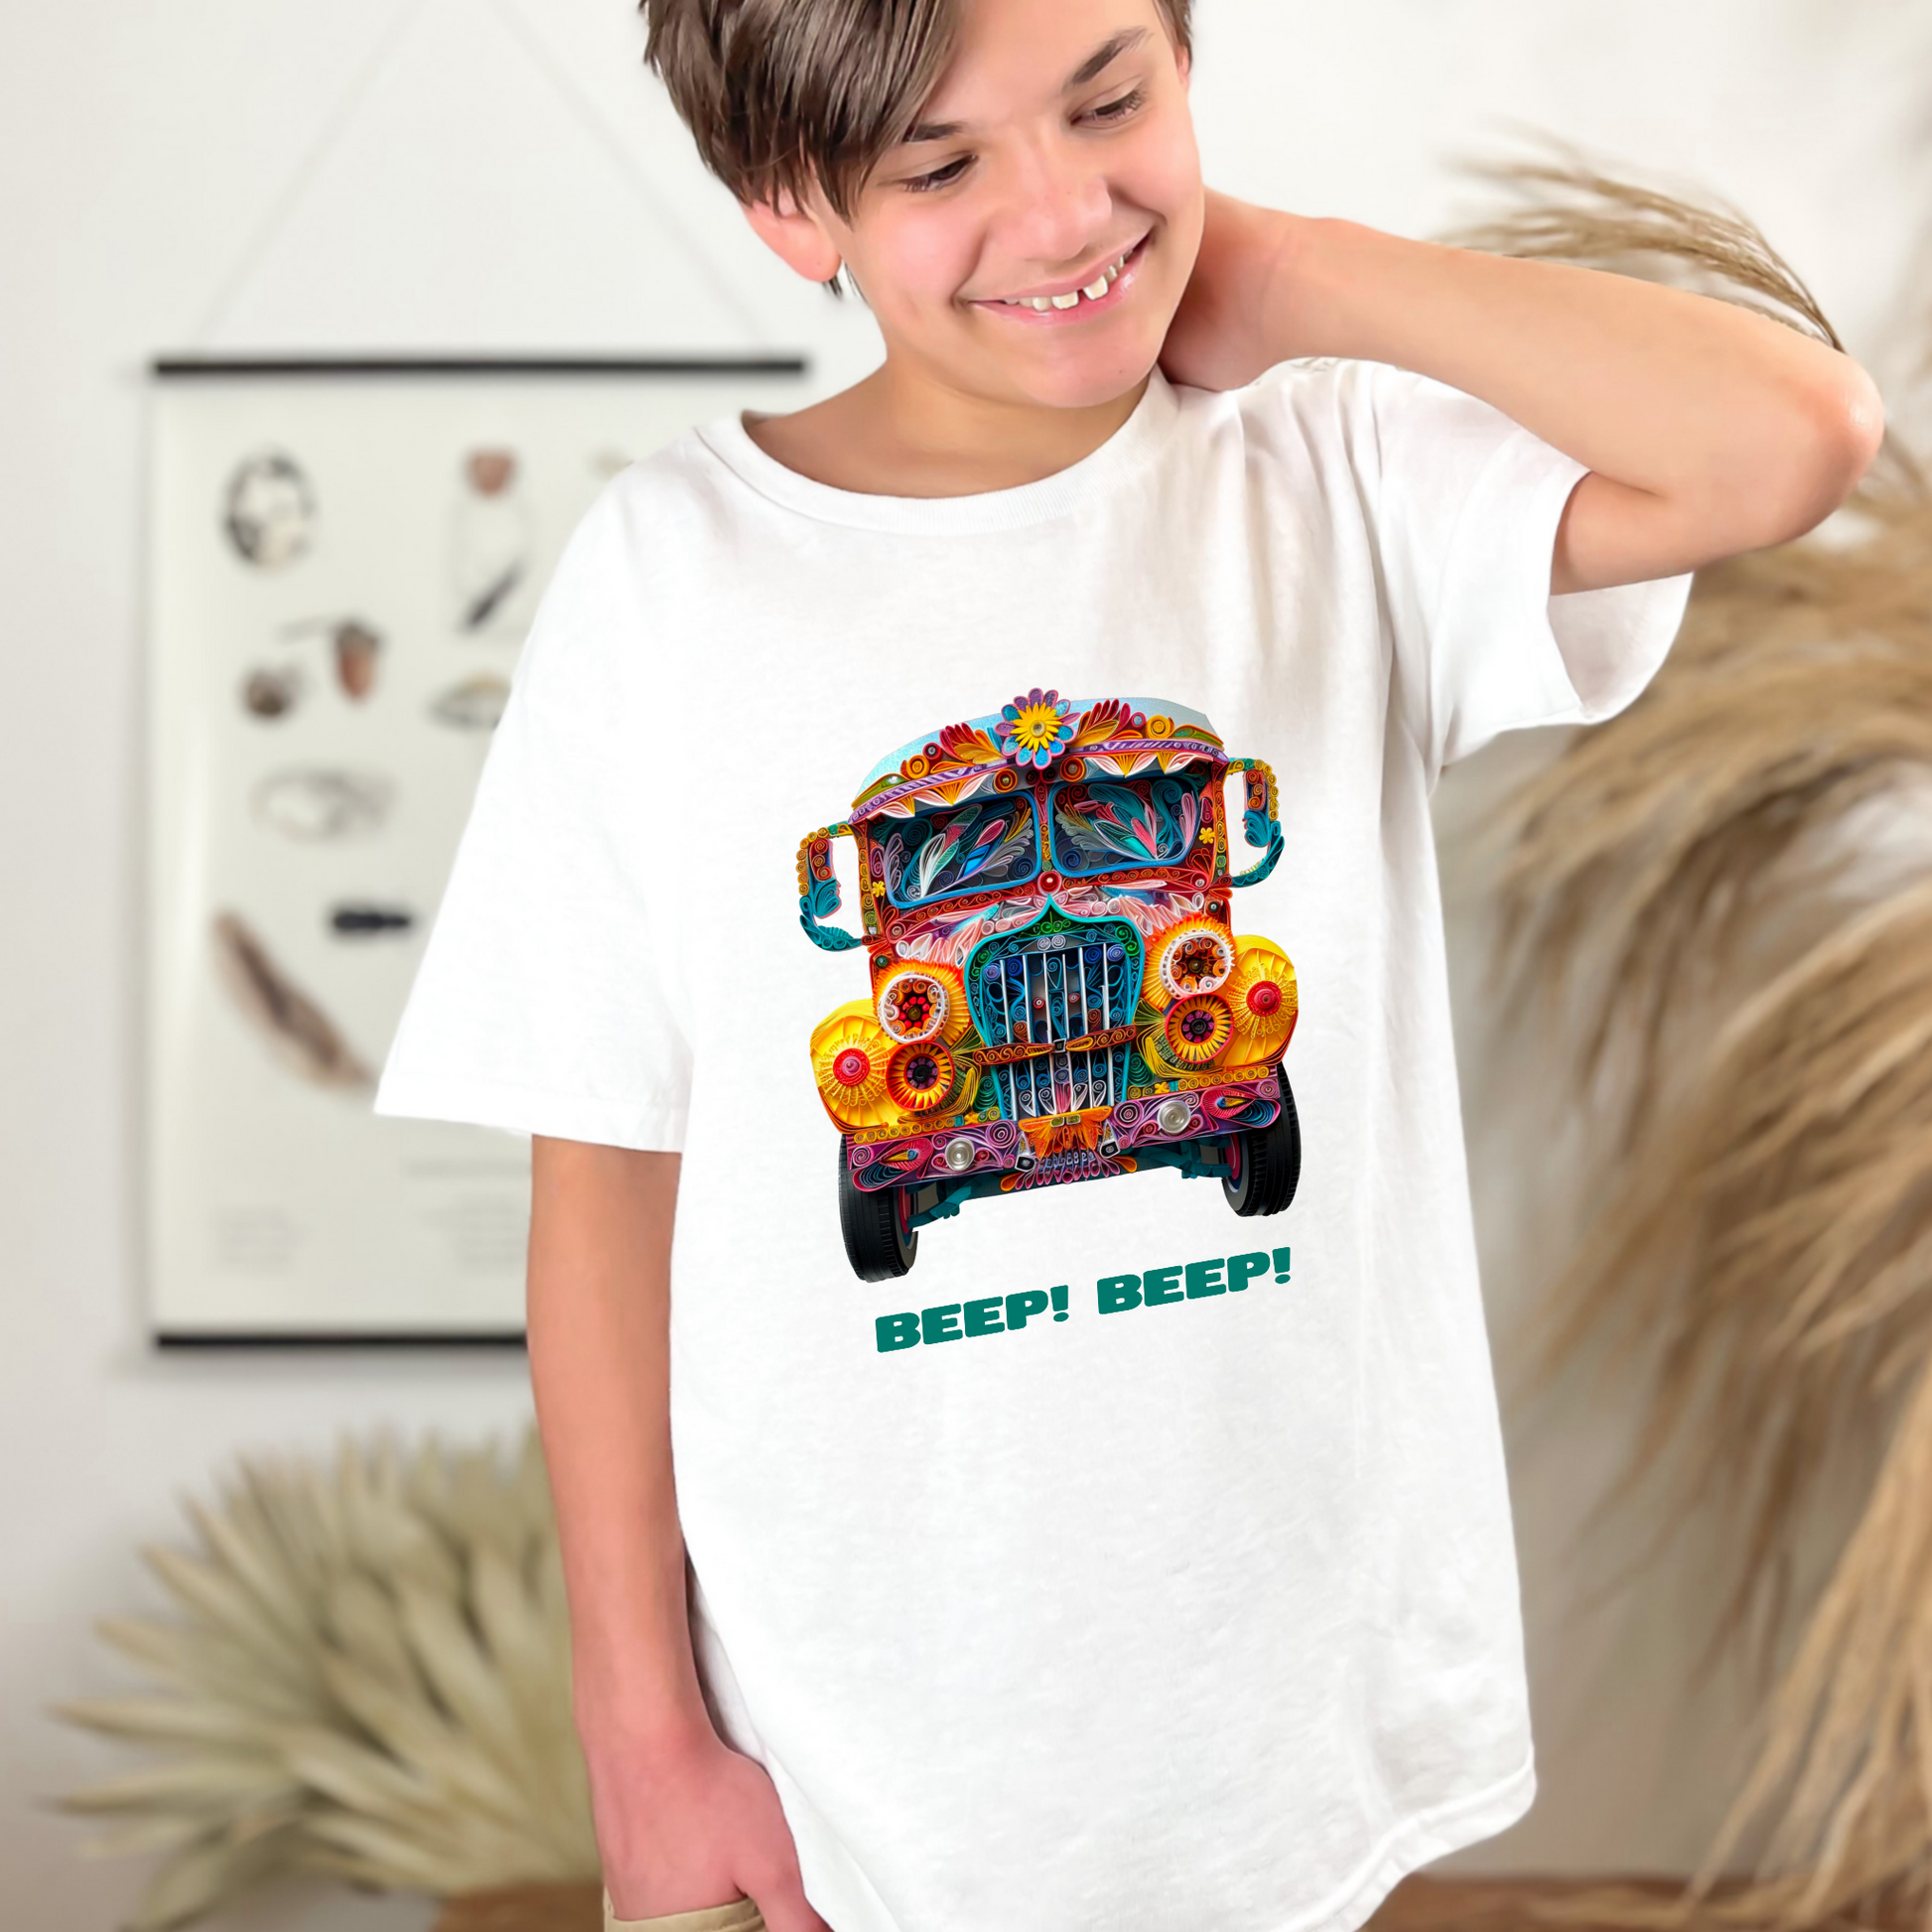 Elevate your kids' style with this Filipino clothing brand, fun graphic t-shirt for kids that is soft to the touch and a great choice for any season. A cultural icon that reflects the identity, values, and creativity of the Filipino people. Wear the Philippine jeepney with pride! Made with 100%, midweight, US cotton Soft to the touch and a great choice for any season Ribbed knit collar for curl resistance Fabric blends: Heather colors - 50% cotton, 50% polyester, Sport Grey - 90% cotton, 10% polyester